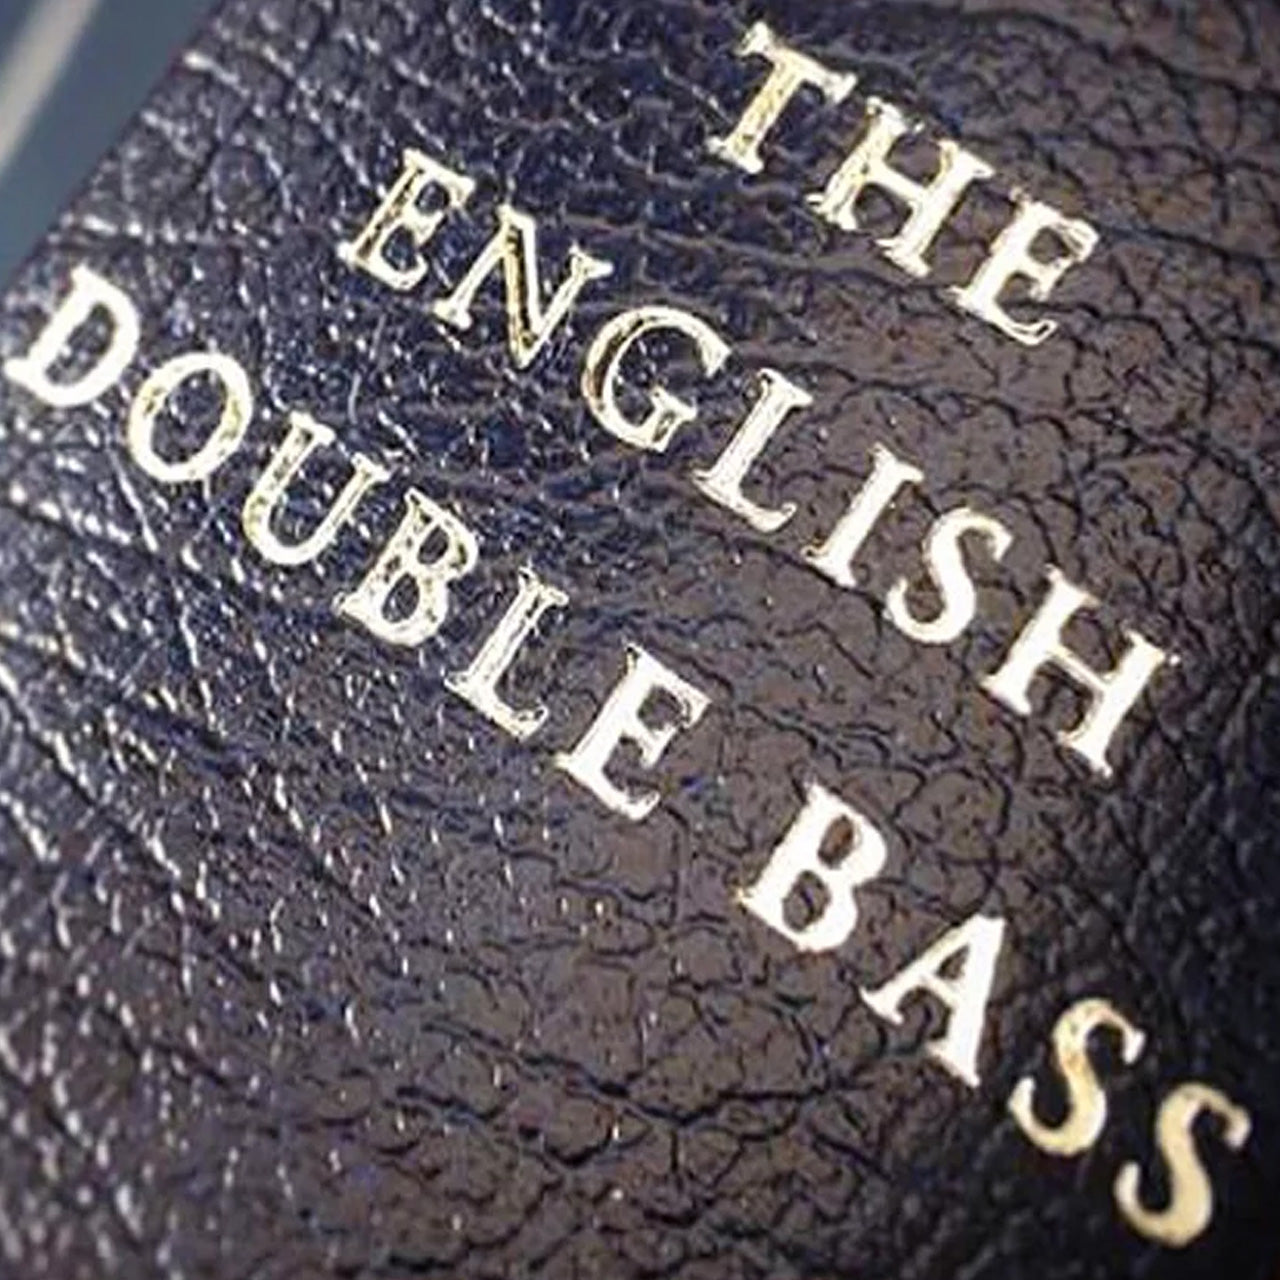 The English Double Bass: Monthly Payment Option